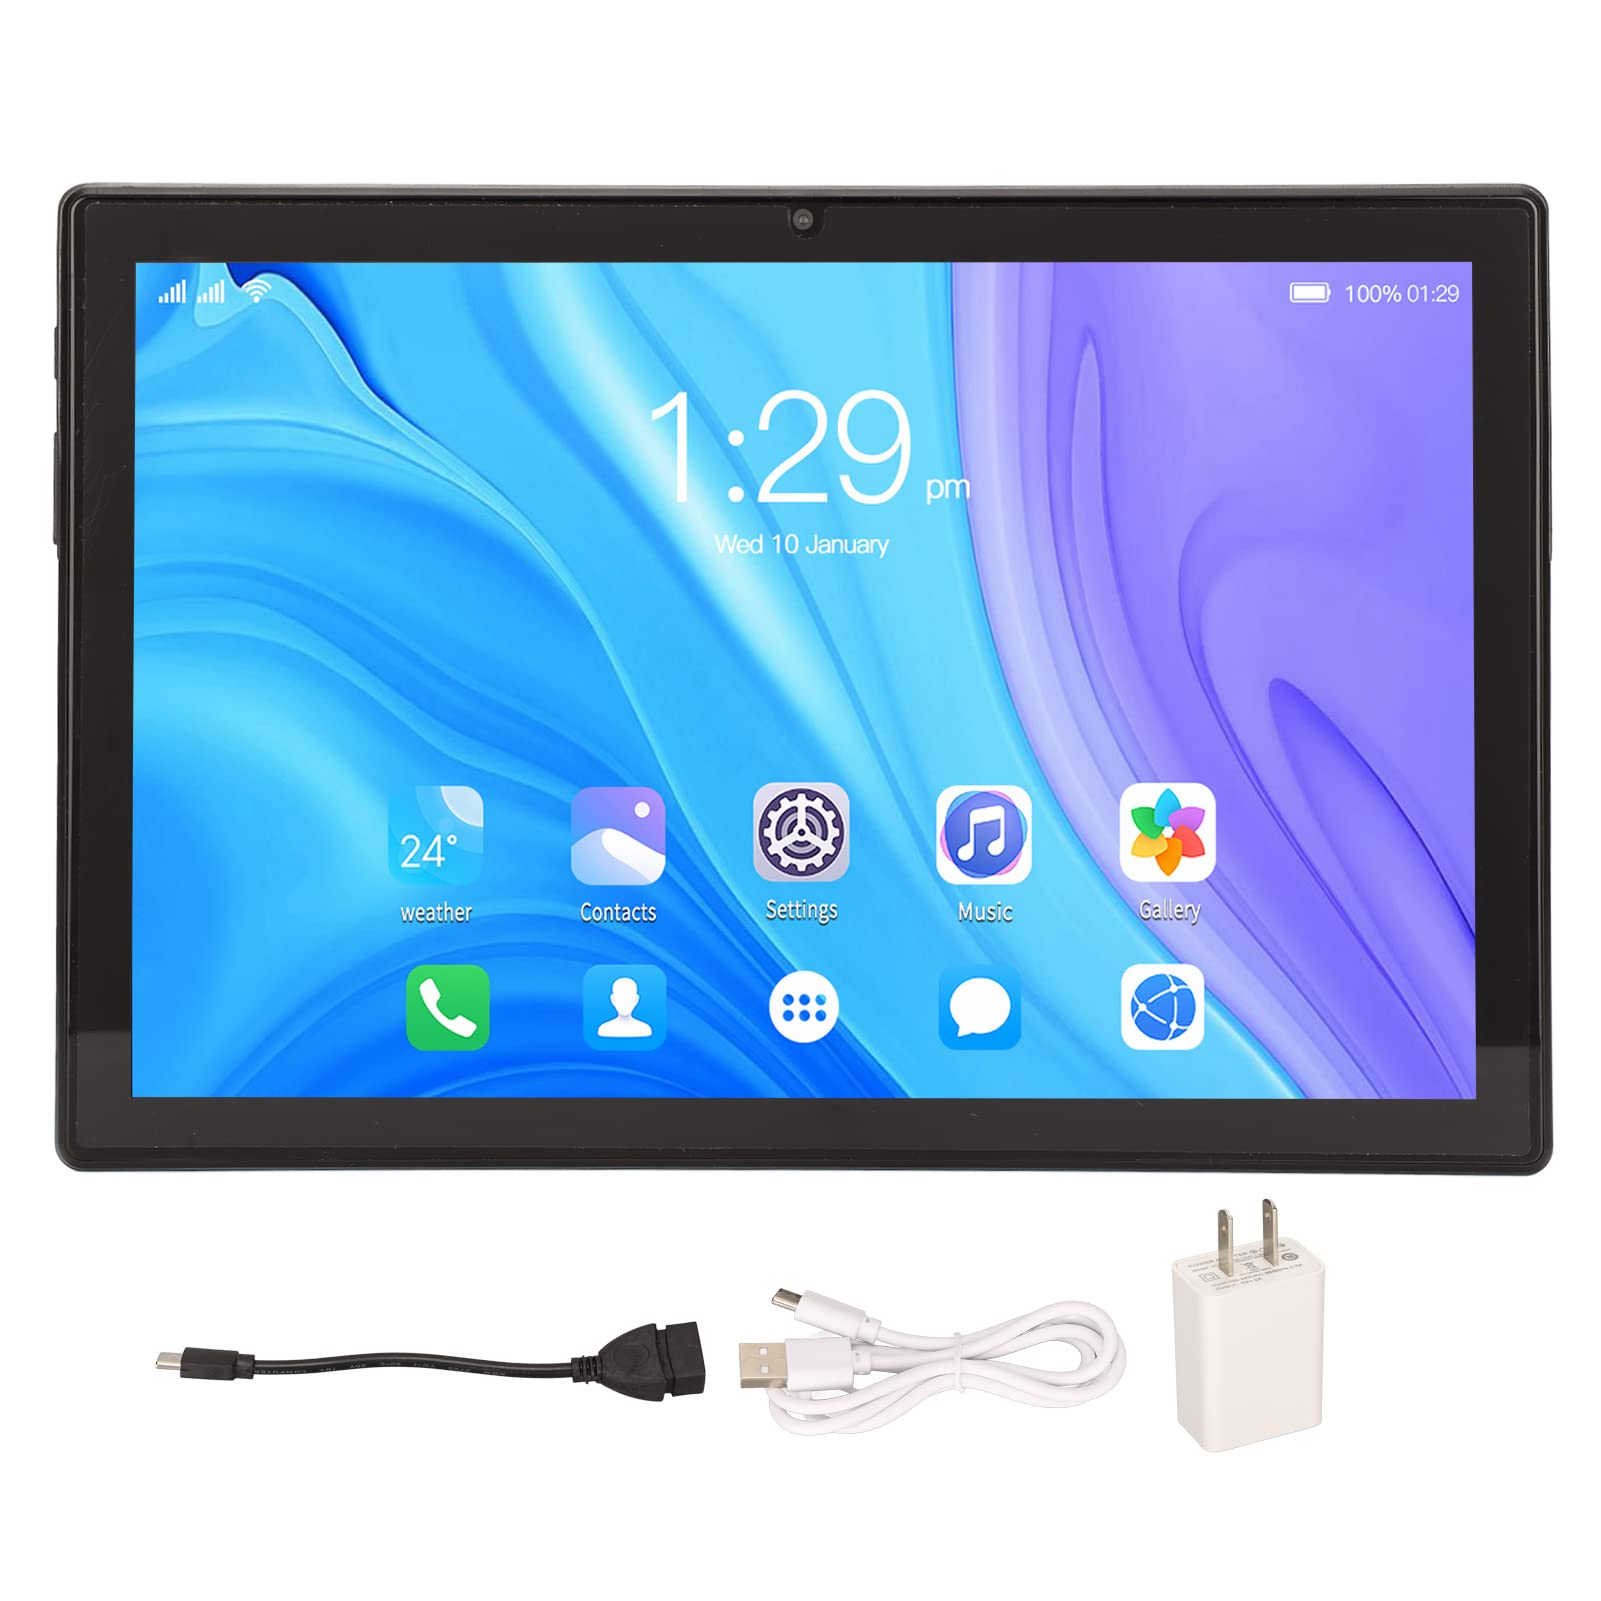 Heayzoki 10 Inch HD Tablet, 6GB 128GB Calling Tablet, IPS HD Touchscreen Blue Callable Tablet, Octa Core Processor, 2.4G 5G Dual Band WiFi